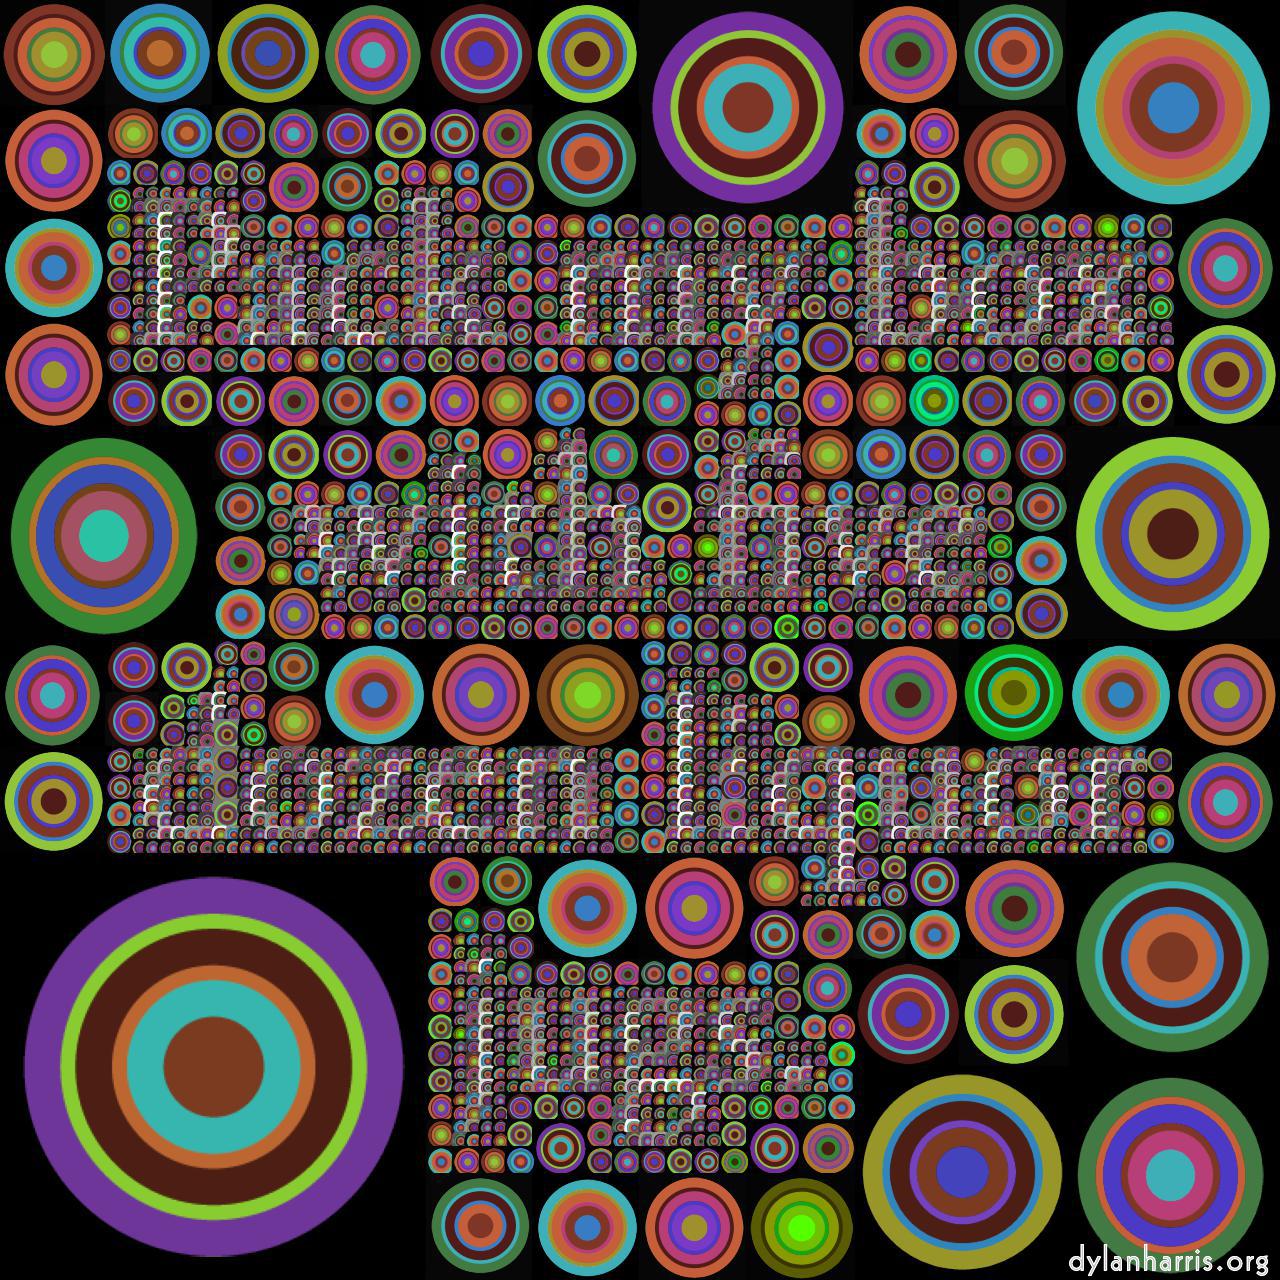 image: mosaic - image folder - try your own images :: alpha png images—colourised with vector palettised